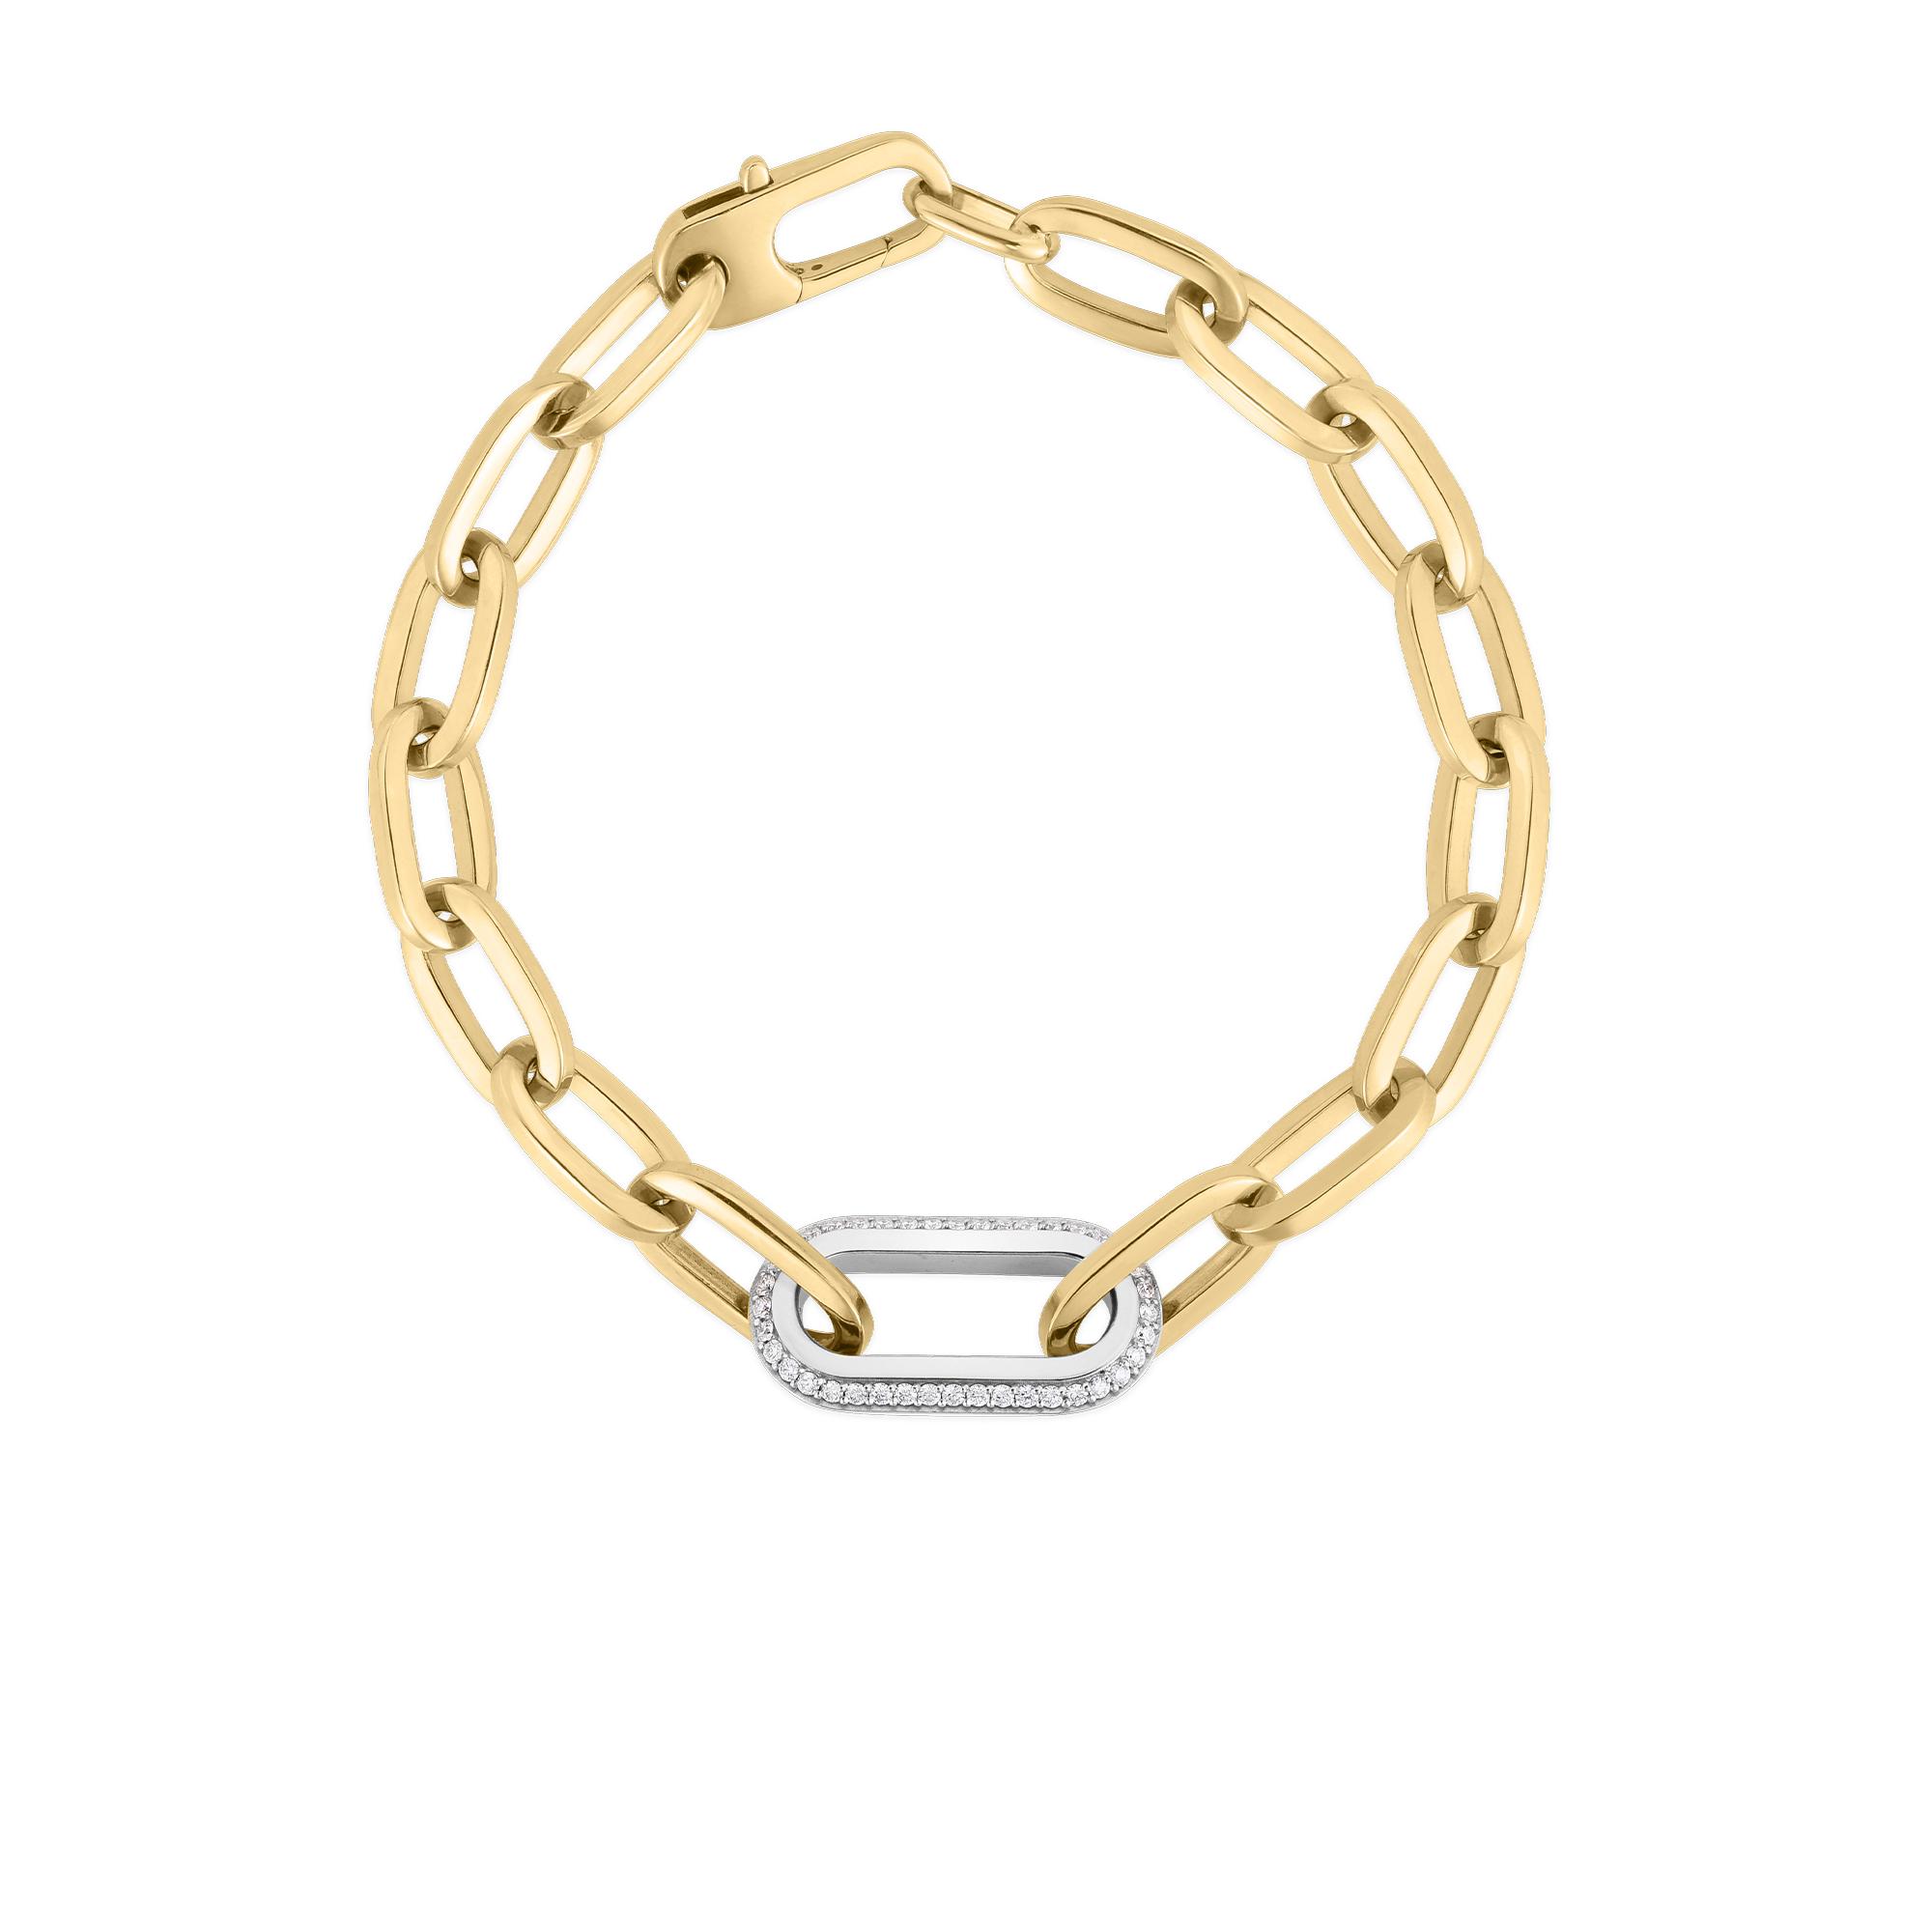 Roberto Coin Designer Gold Paperclip Bracelet with Large Diamond Link